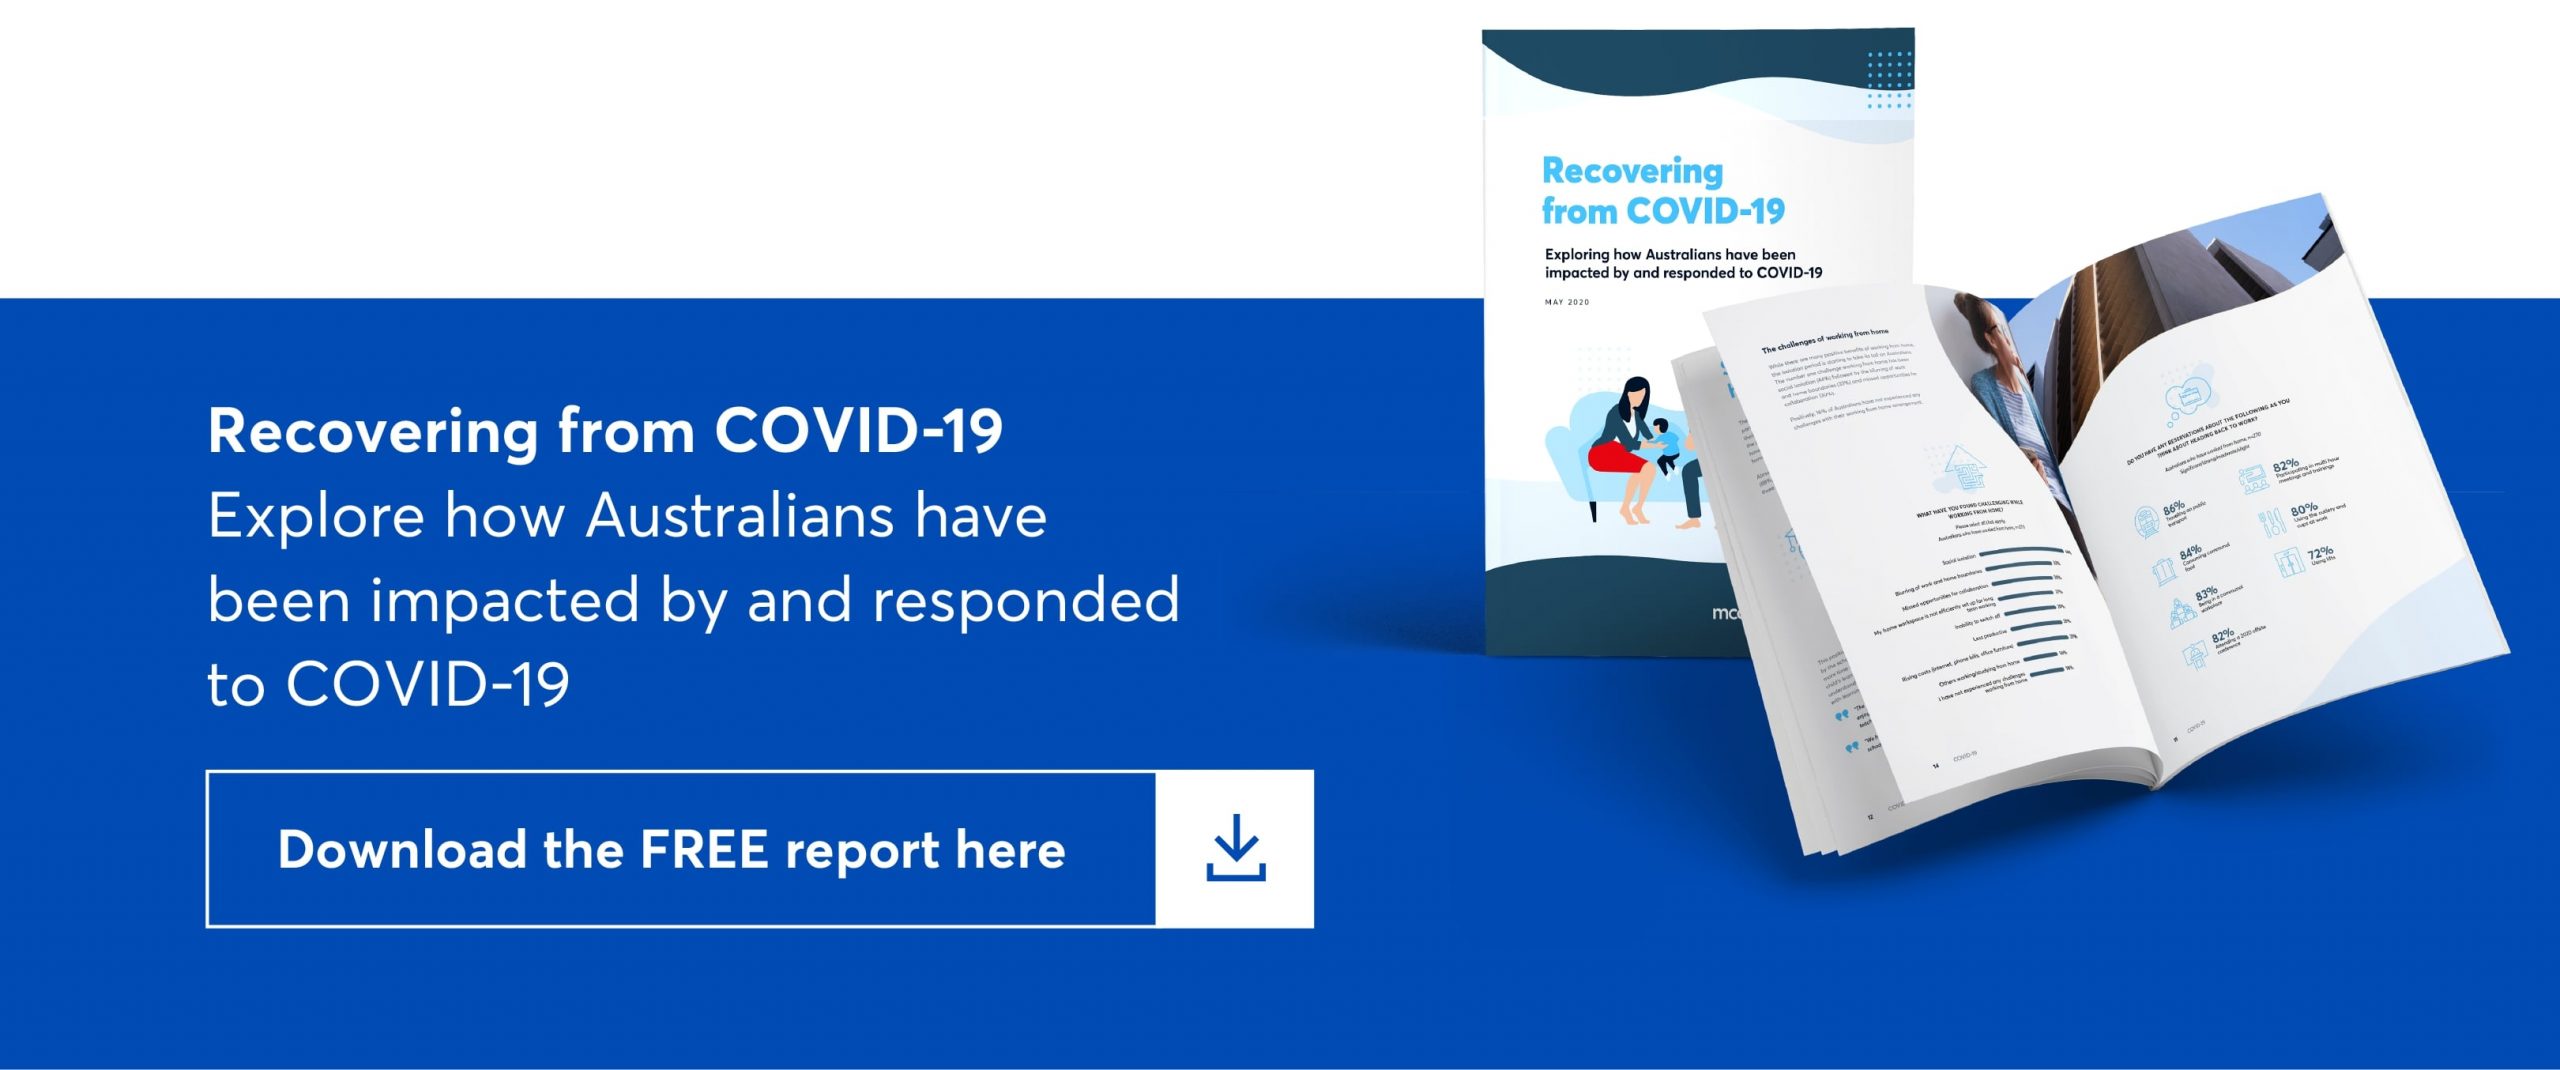 image which shows text which says recovering from covid-19. explore how australians have been impacted by and responded to covid-19 and a button which says download the free report here.